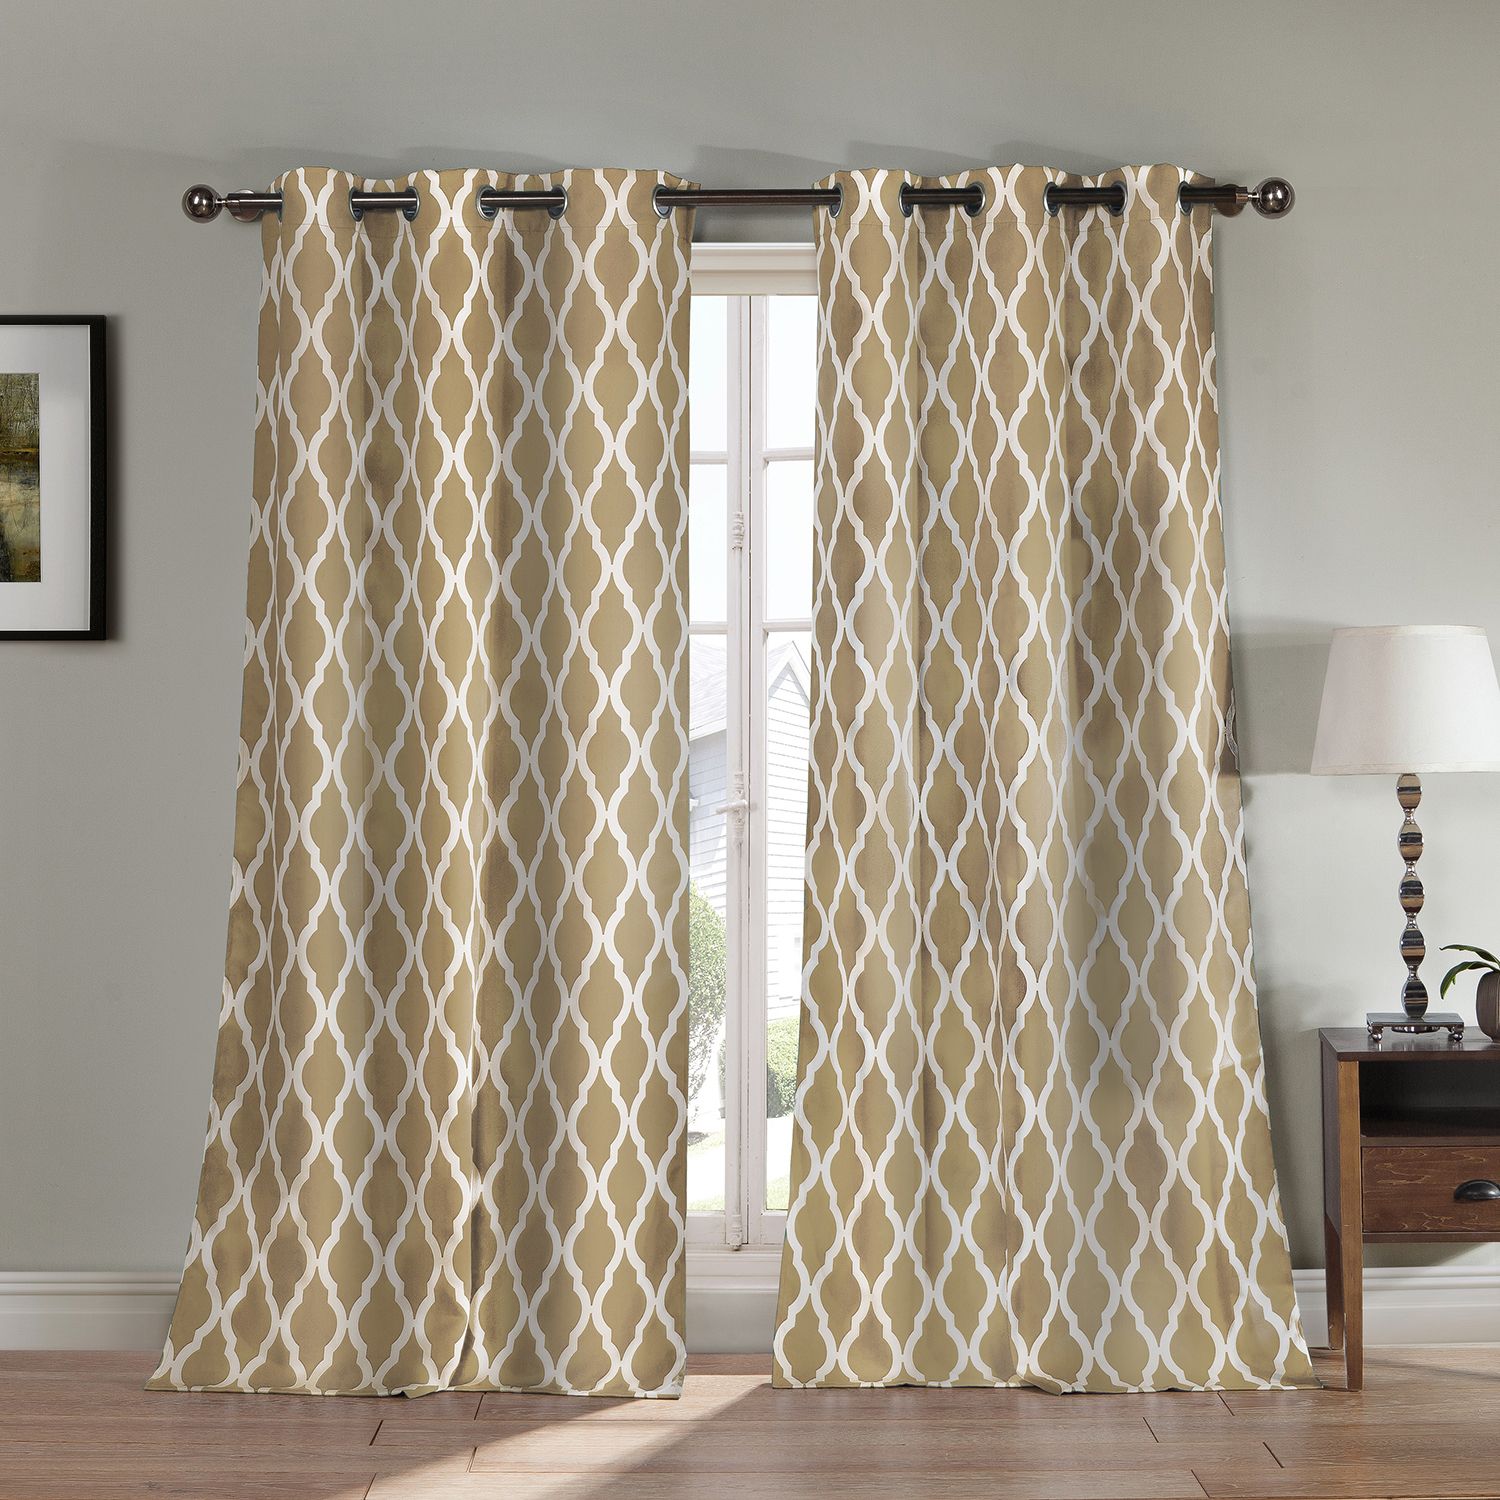 Image for Duck River Textile Kittattinny Blackout 2-pack Window Curtain Set at Kohl's.